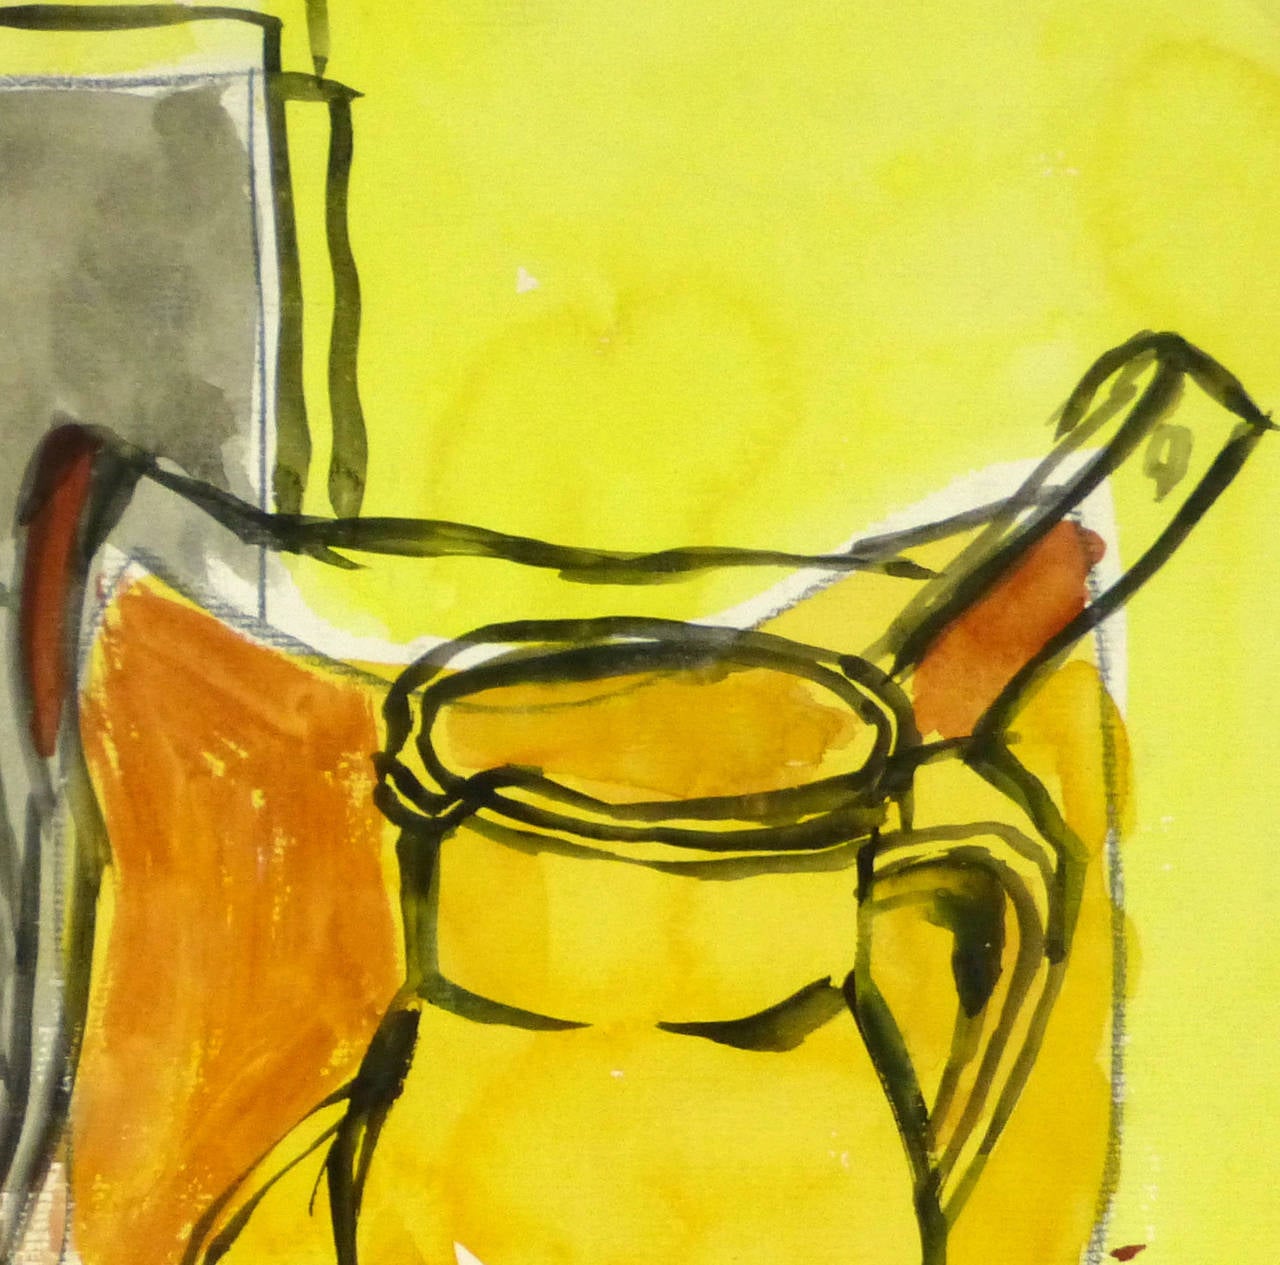 French watercolor and ink painting by artist Wornser, circa 1950. Featuring dark outlines and unfinished forms against a bold yellow background, this piece brings a contemporary edge to the traditional still-lives of previous centuries. 

Original